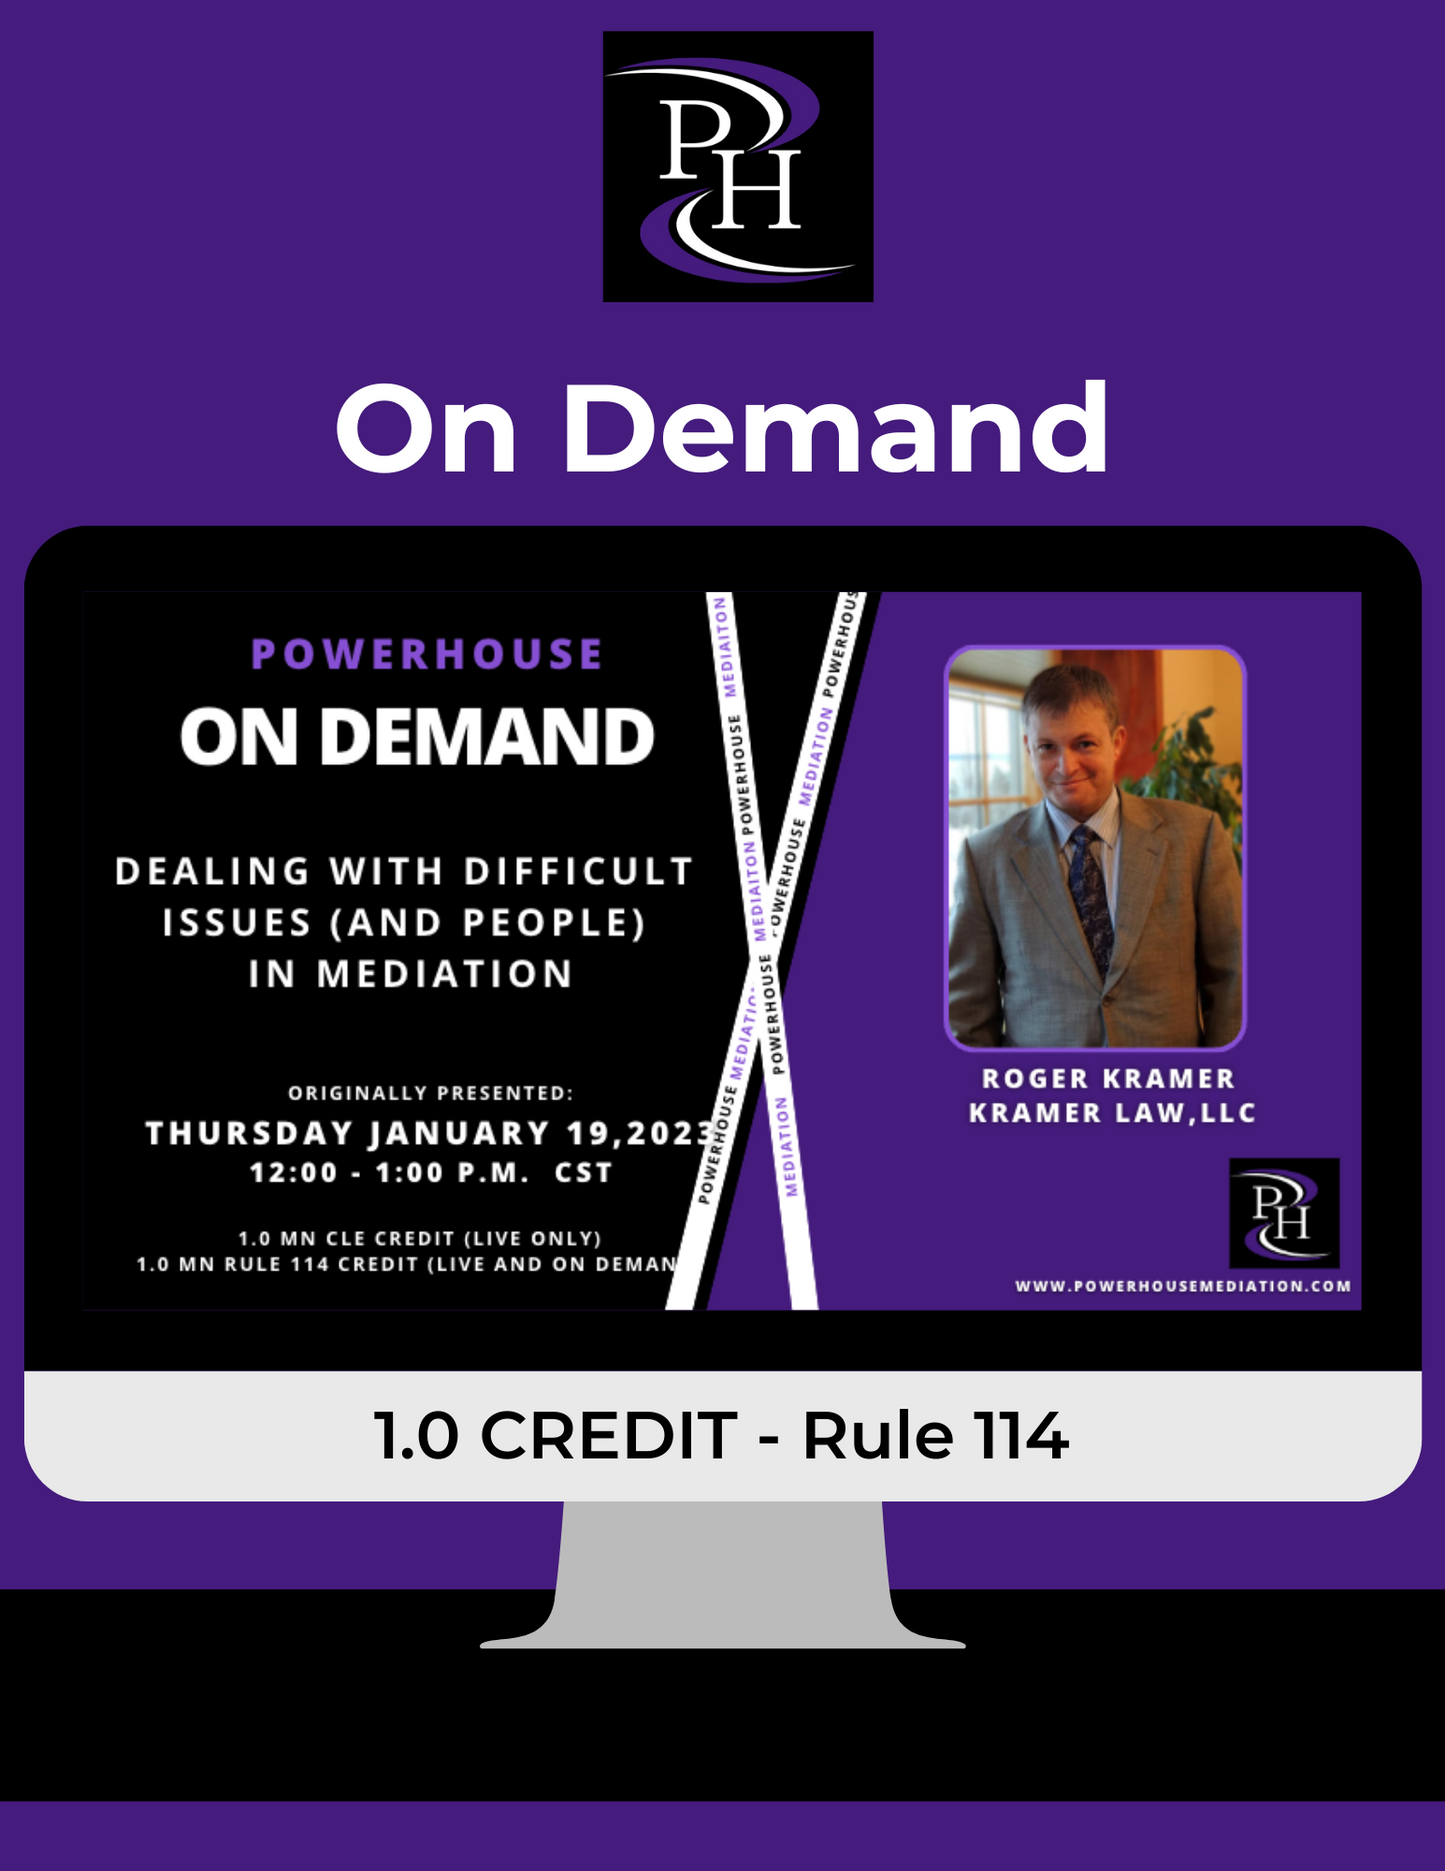 On Demand - Dealing with Difficult Issues (and People) in Mediation (Roger Kramer)